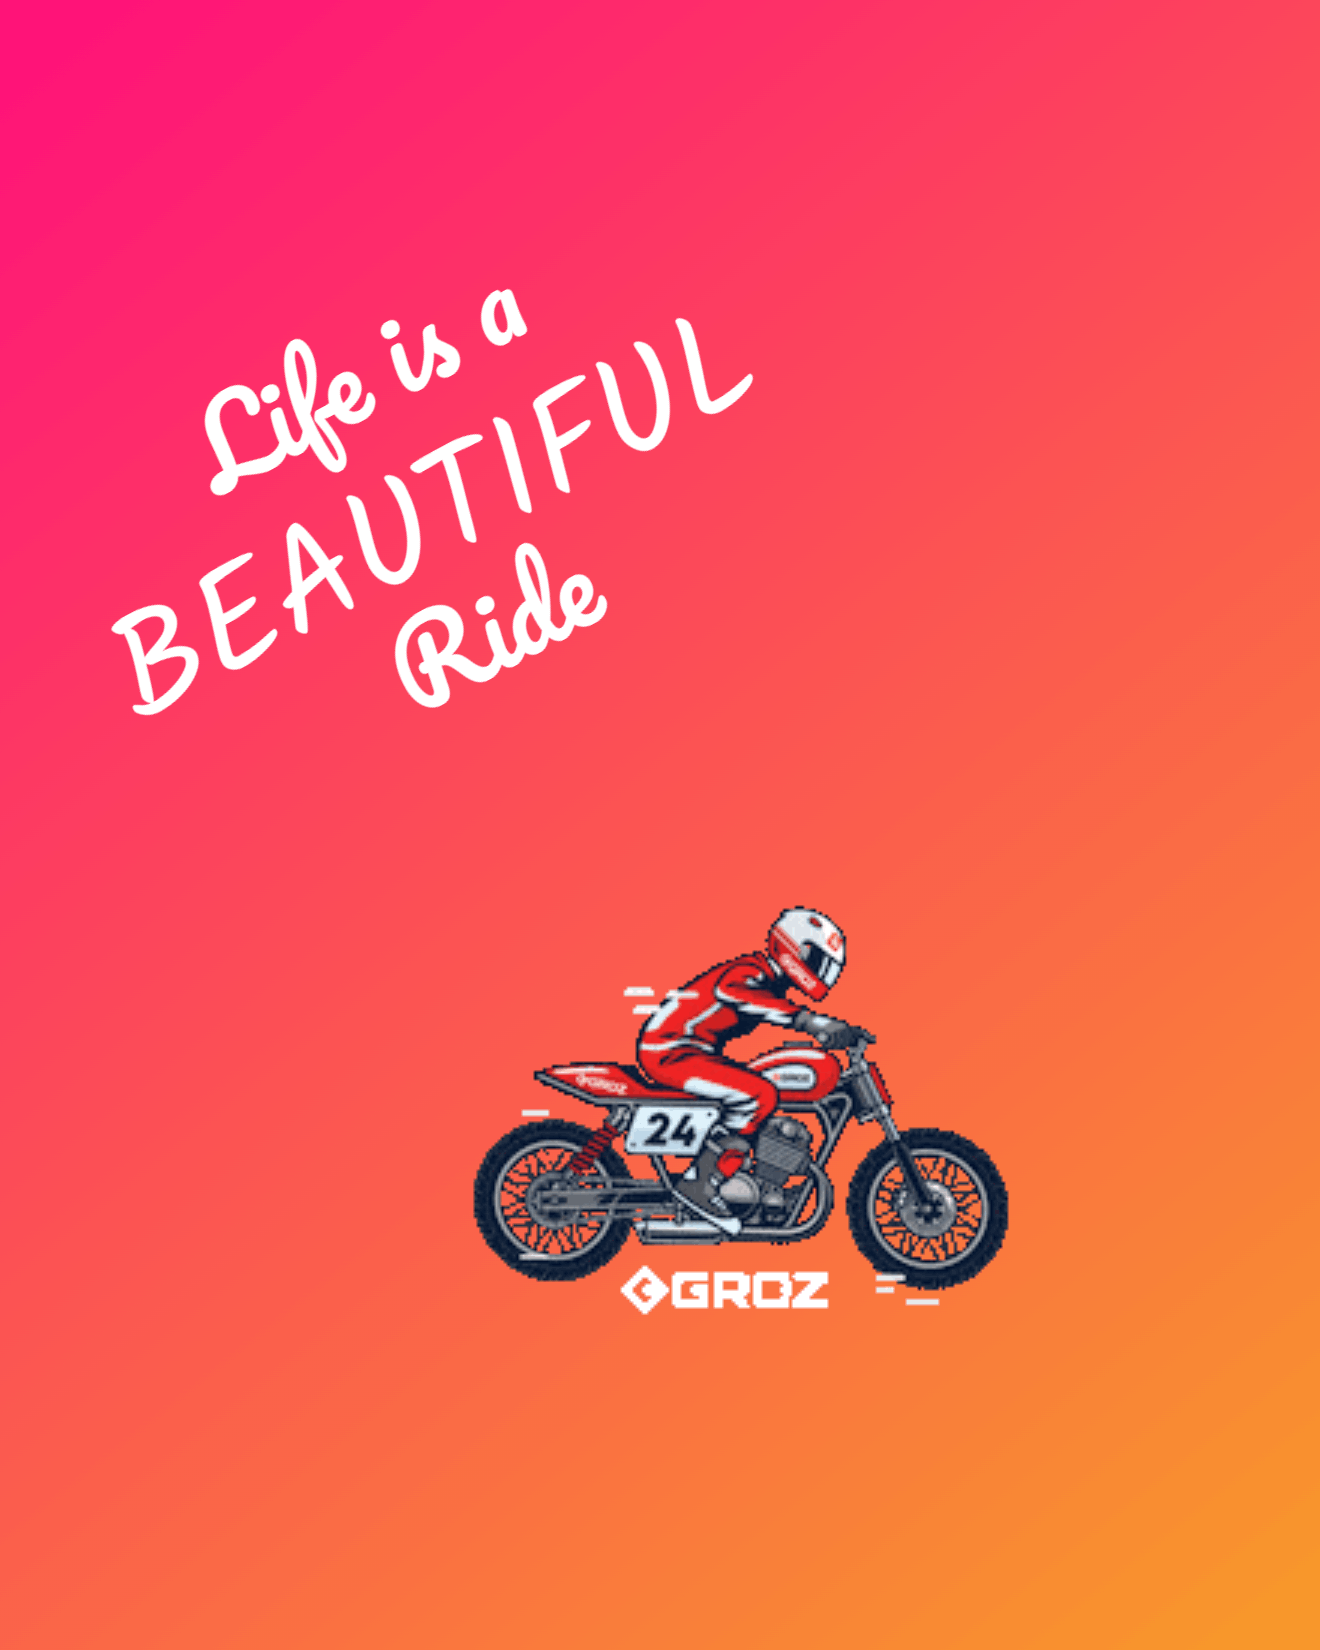 life is a beautiful ride